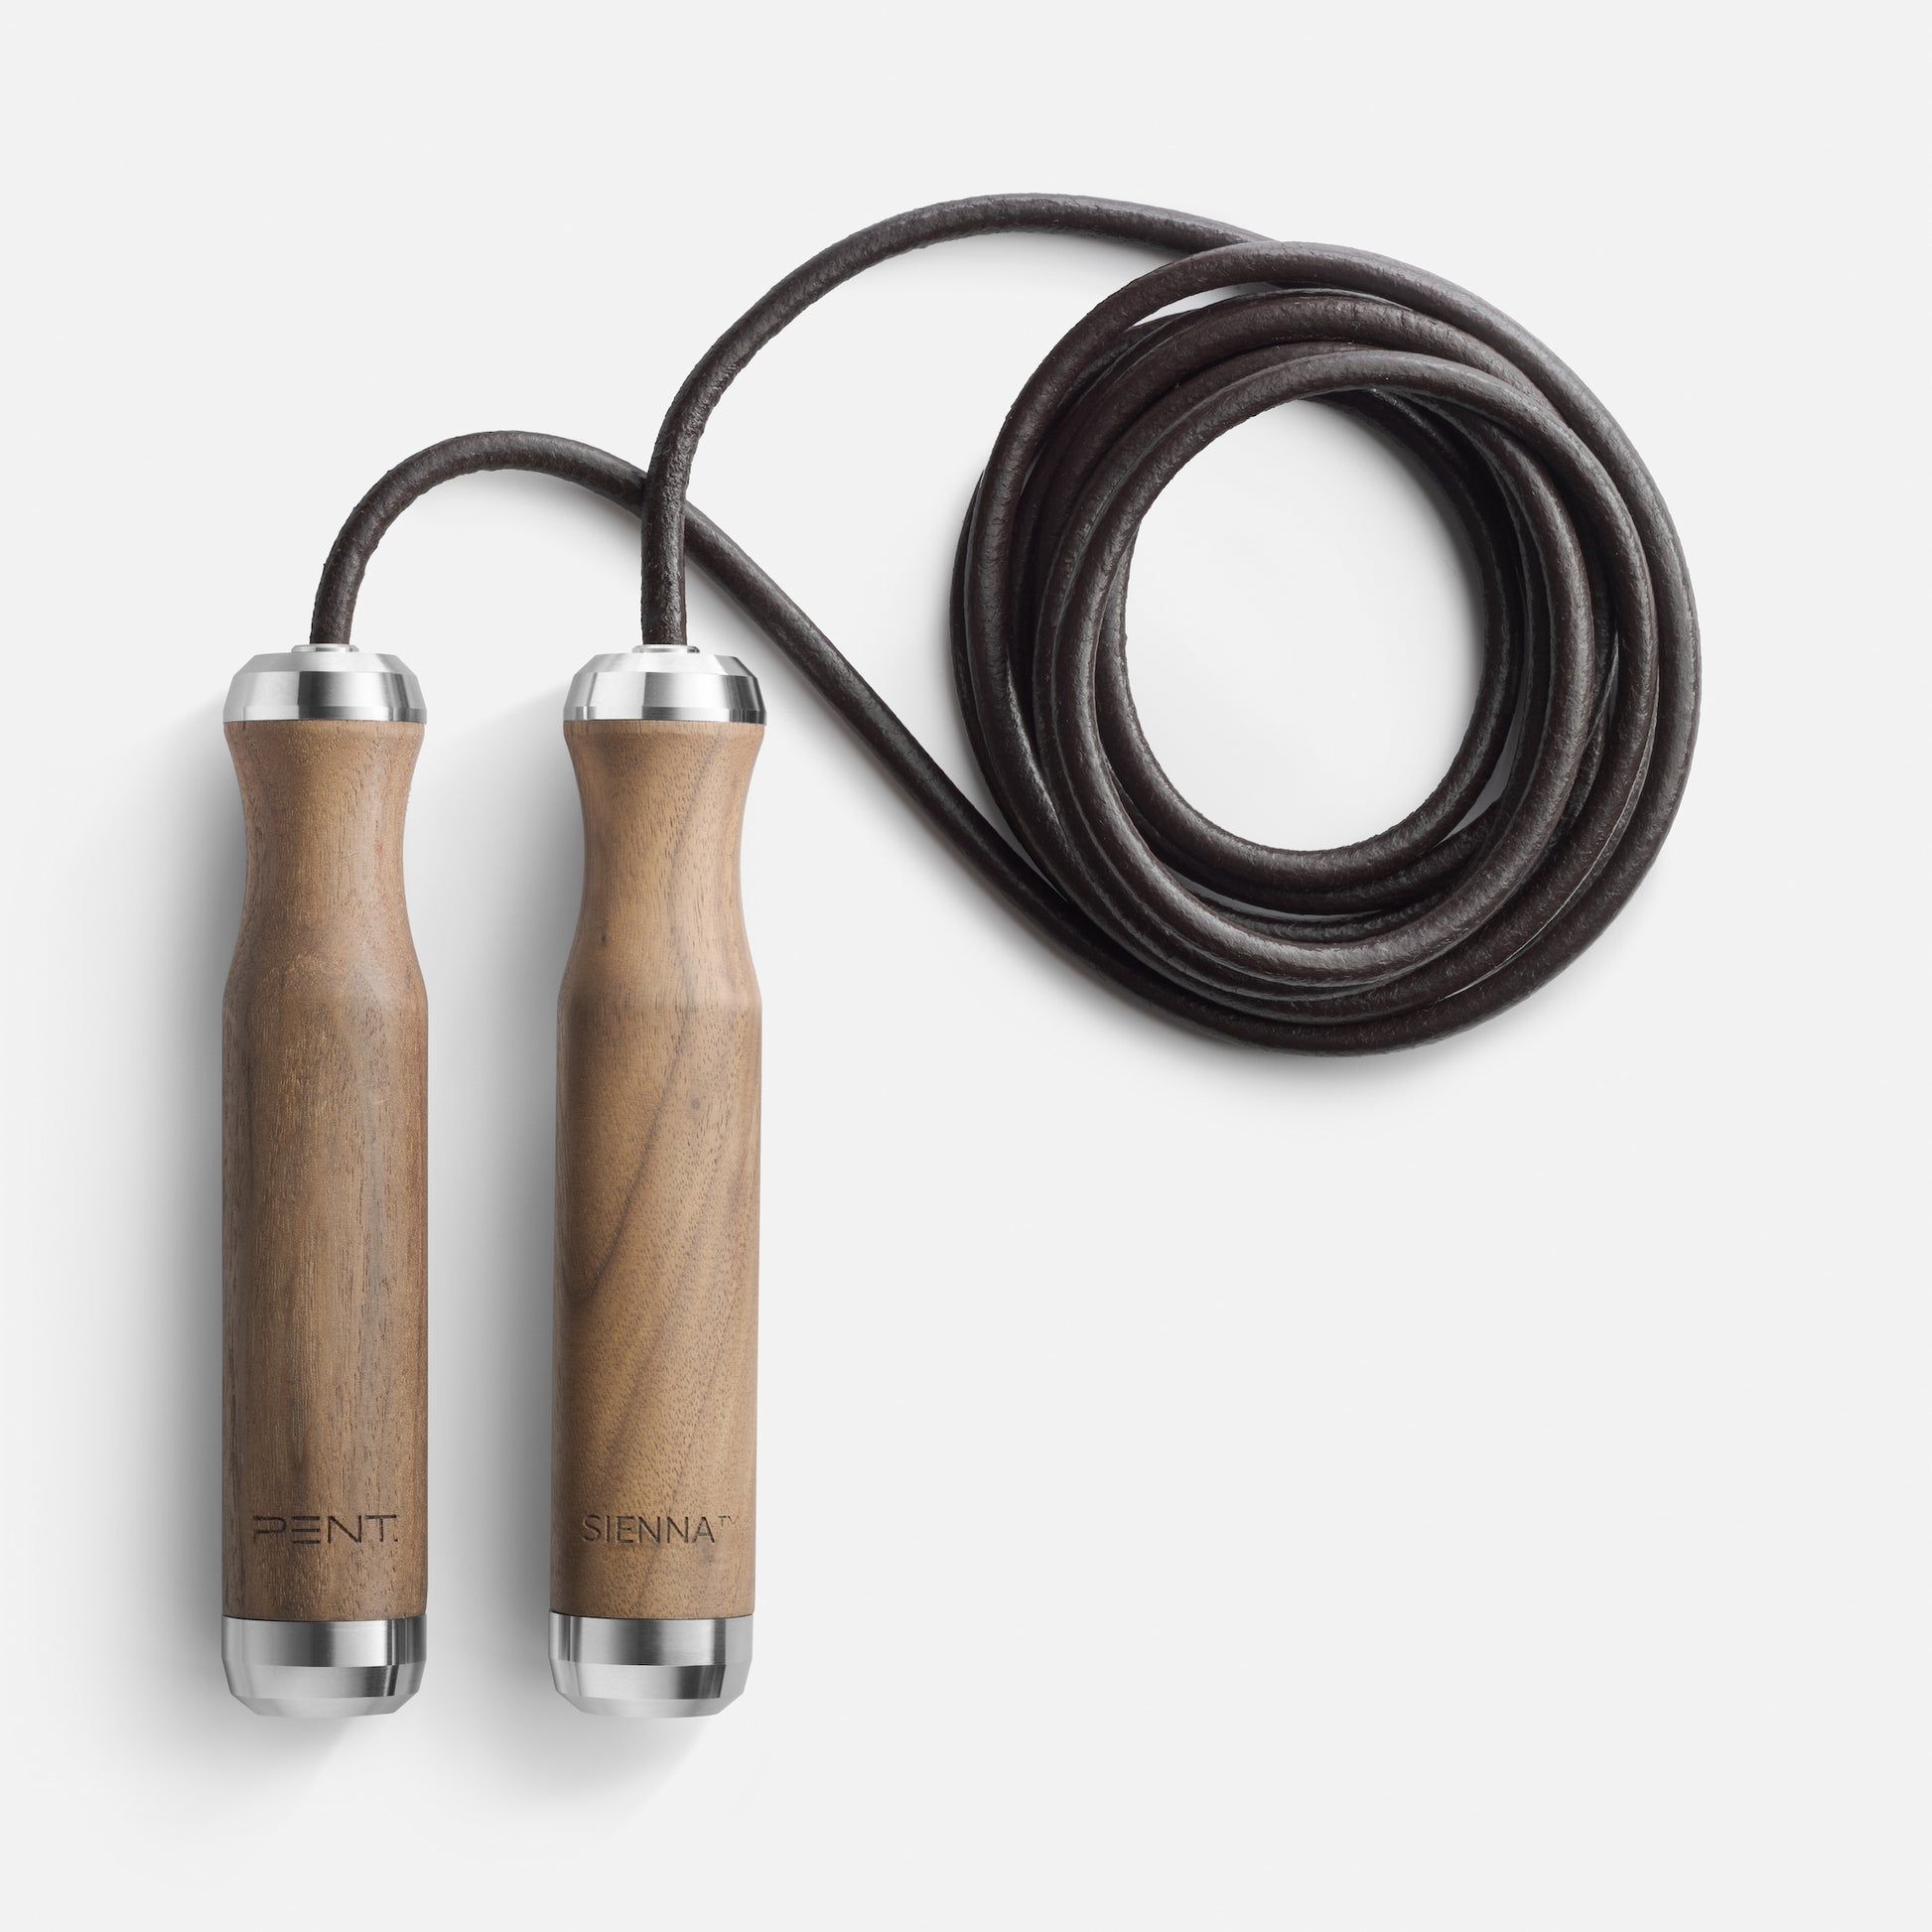 Luxury Exercise Equipment. Fully customizable skipping rope. PENT Sienna. Cycling Bears